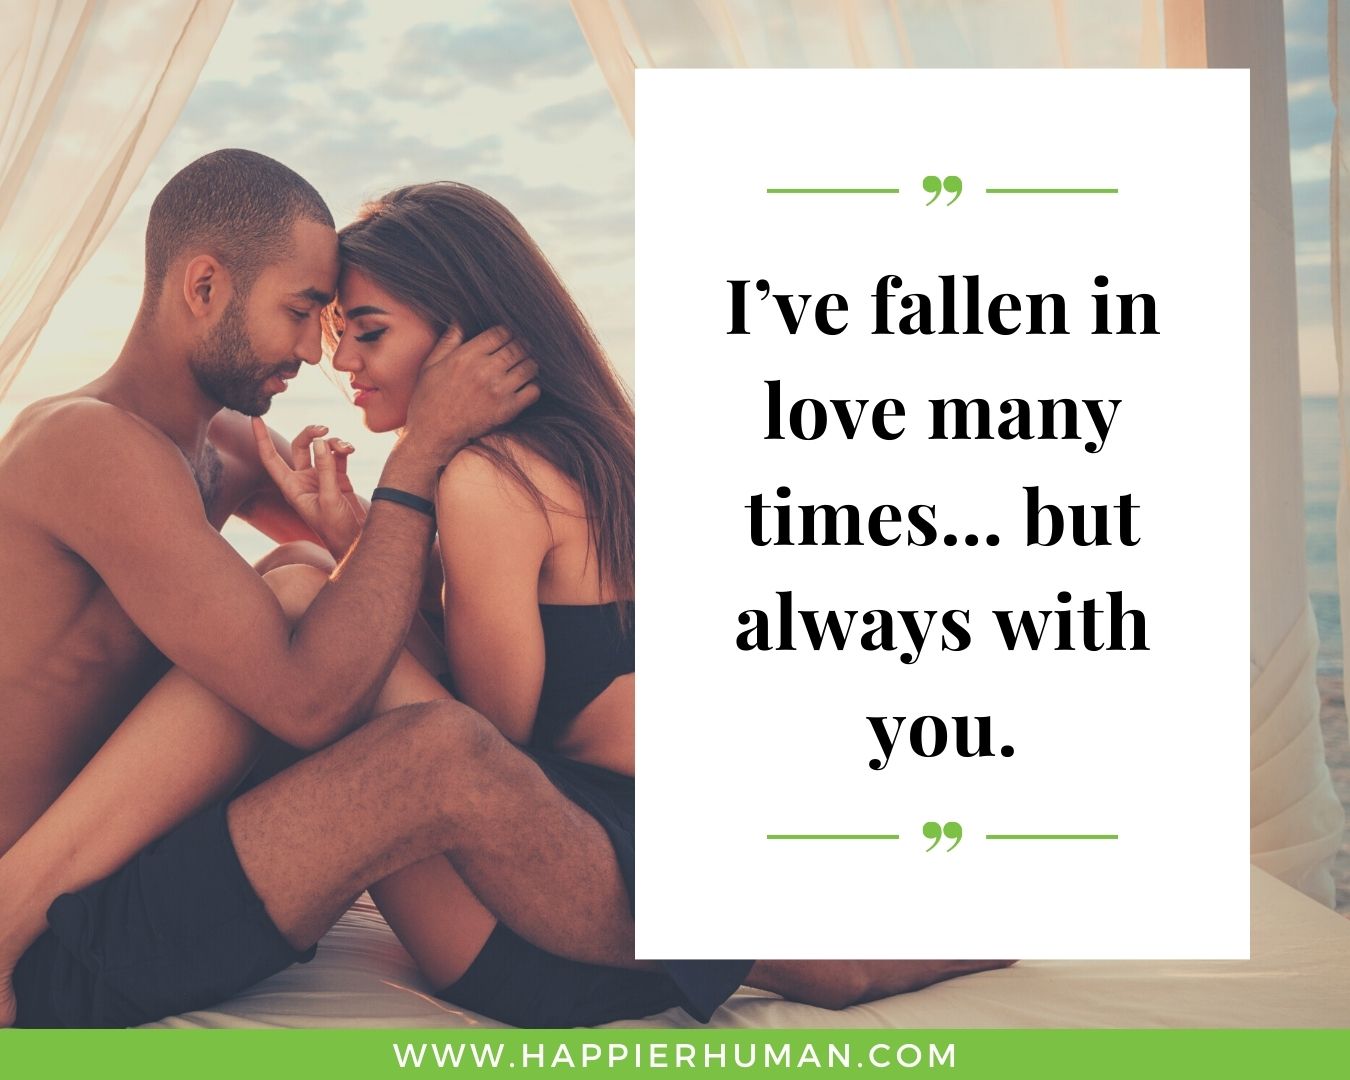 Short, Deep Love Quotes for Her - “I’ve fallen in love many times… but always with you.”